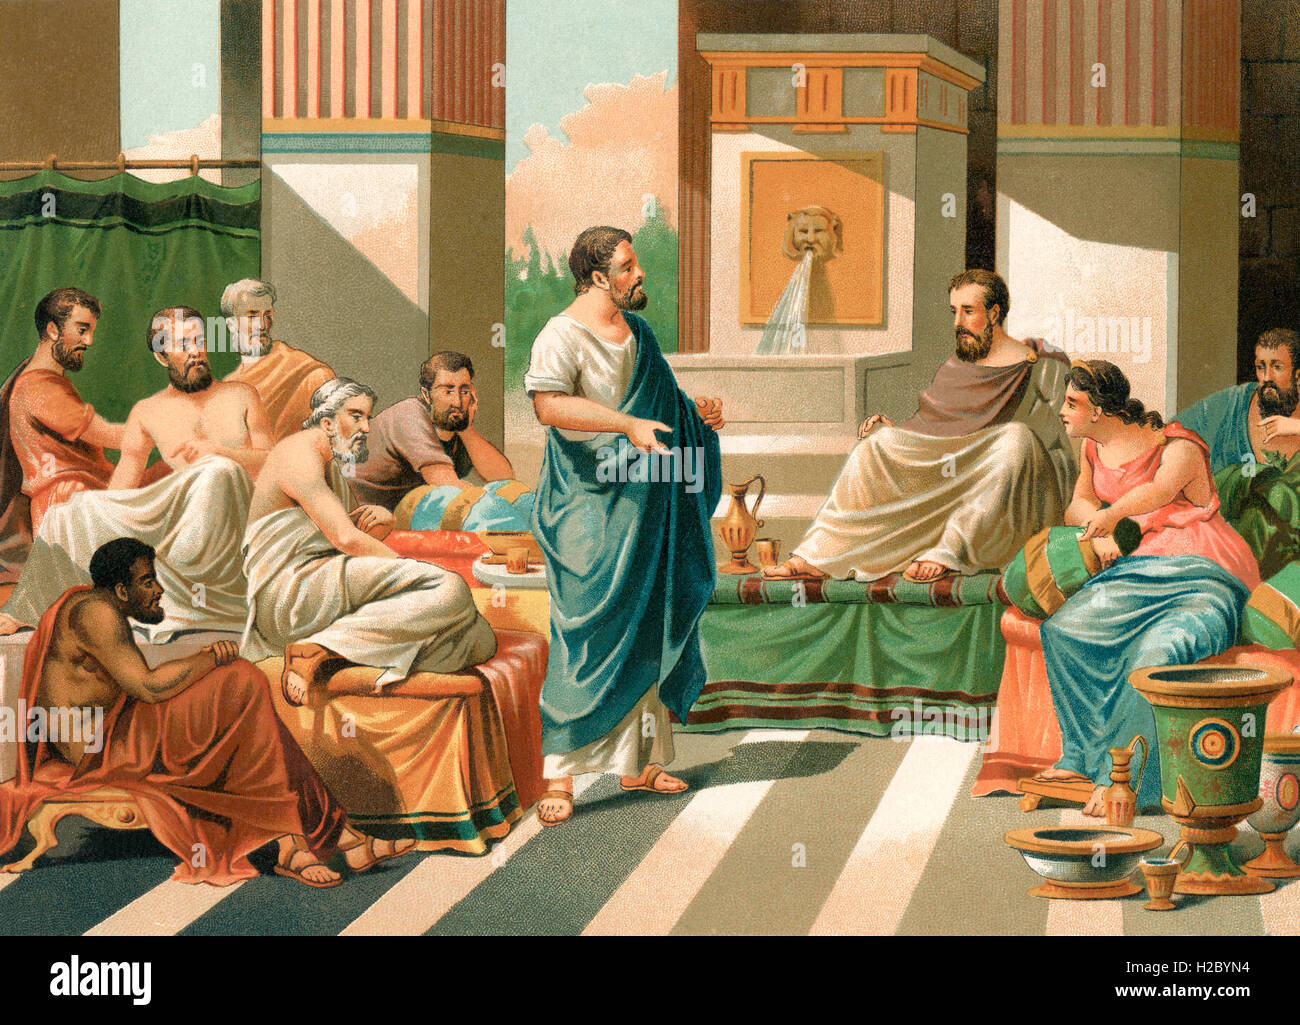 A banquet attended by the Seven Sages of Greece.  Periander, Thales, Solon, Cleobulus, Chilon, Bias, and Pittacus, seven early-6th-century BC philosophers, statesmen, and law-givers who were renowned for their wisdom. Stock Photo